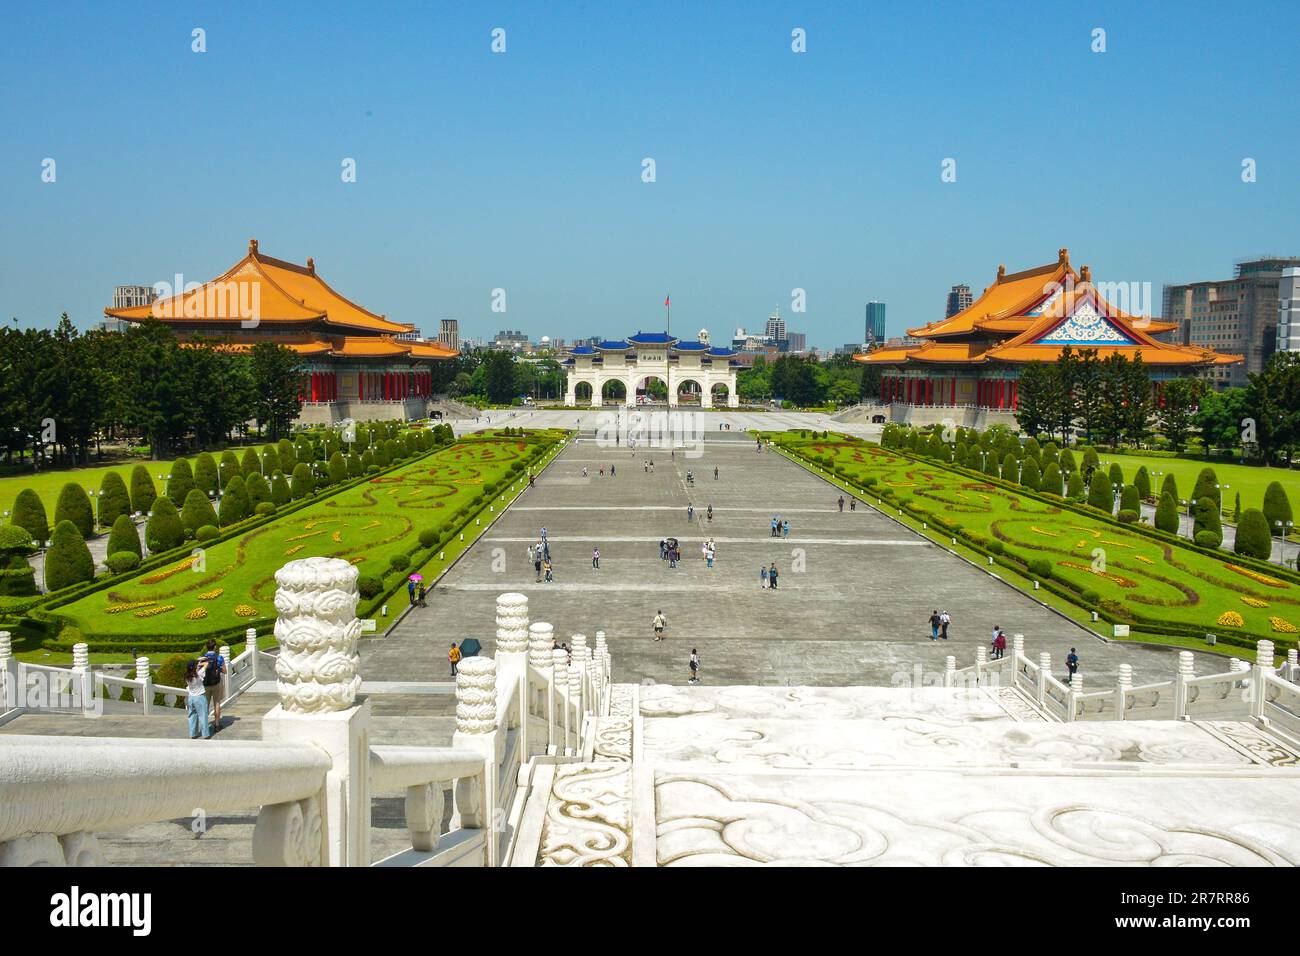 View over the National Taiwan Democracy Square at Chiang Kai-Shek Memorial Hall, the famous tourists destination in Taipei, Taiwan Stock Photo